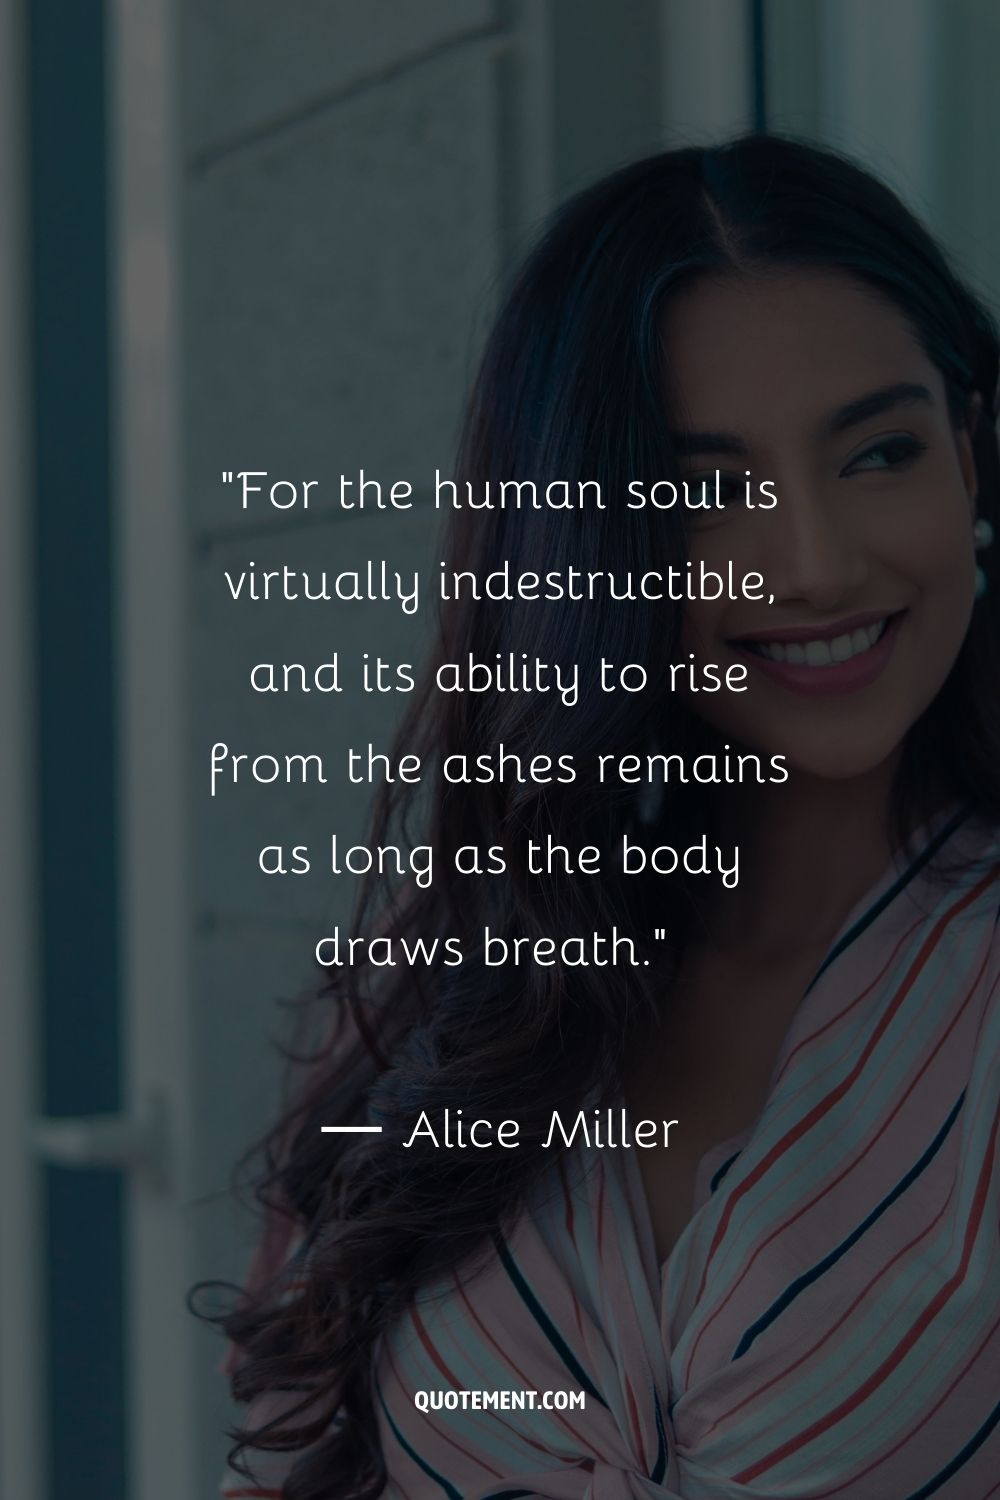 For the human soul is virtually indestructible, and its ability to rise from the ashes remains as long as the body draws breath